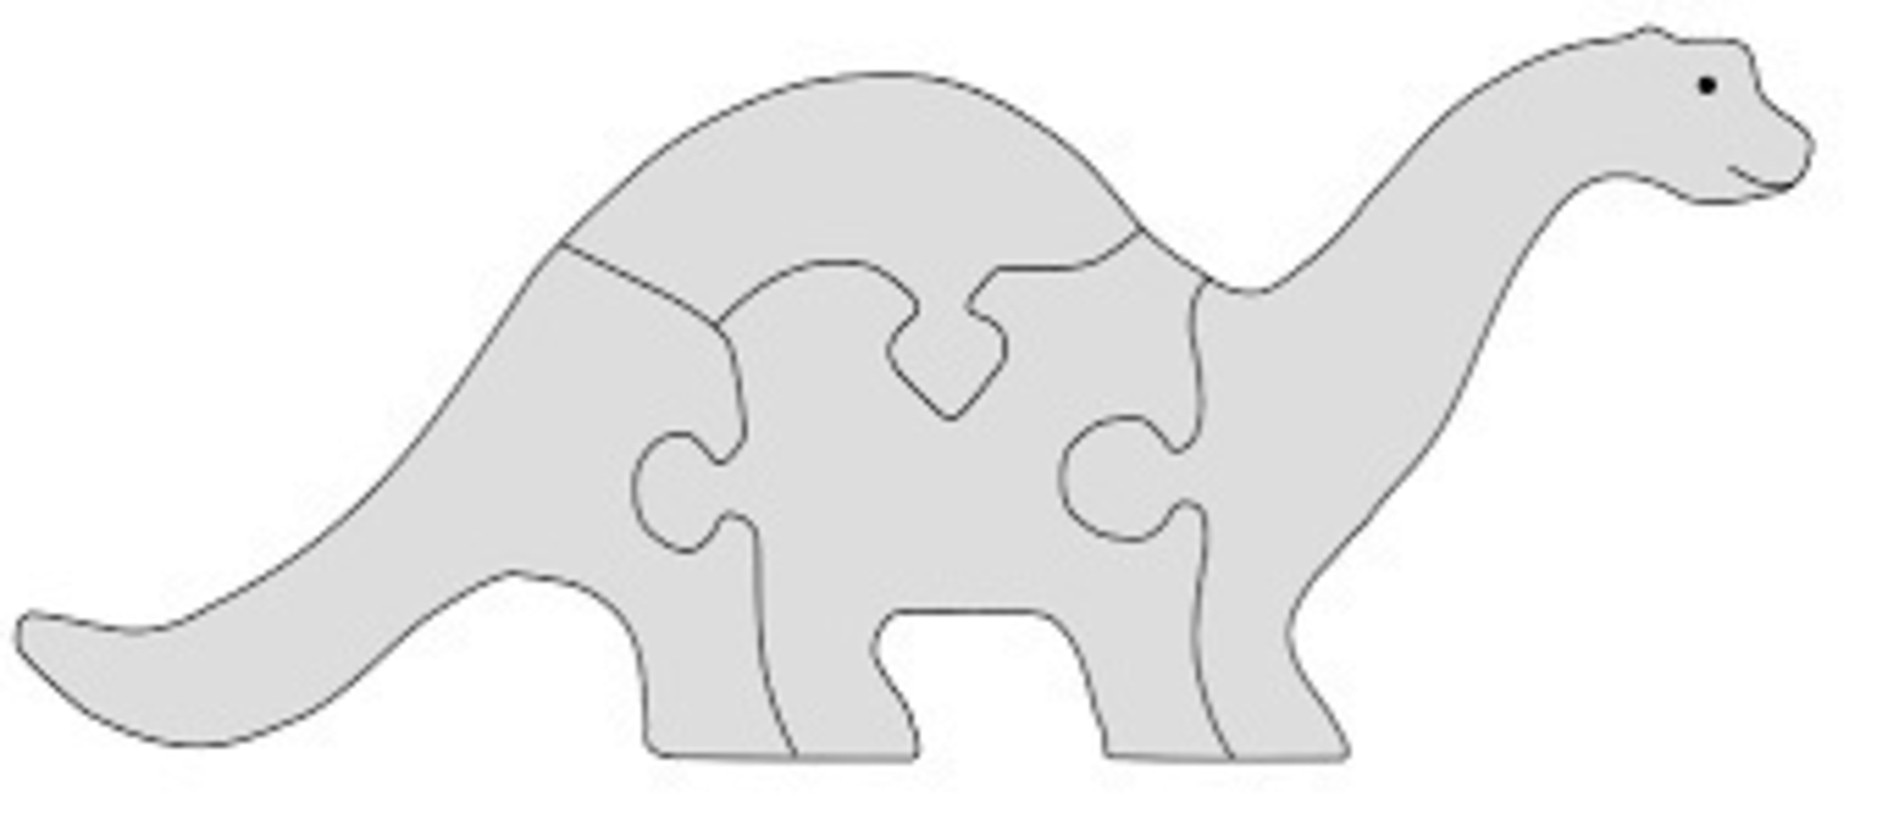 Dino puzzle for kids news